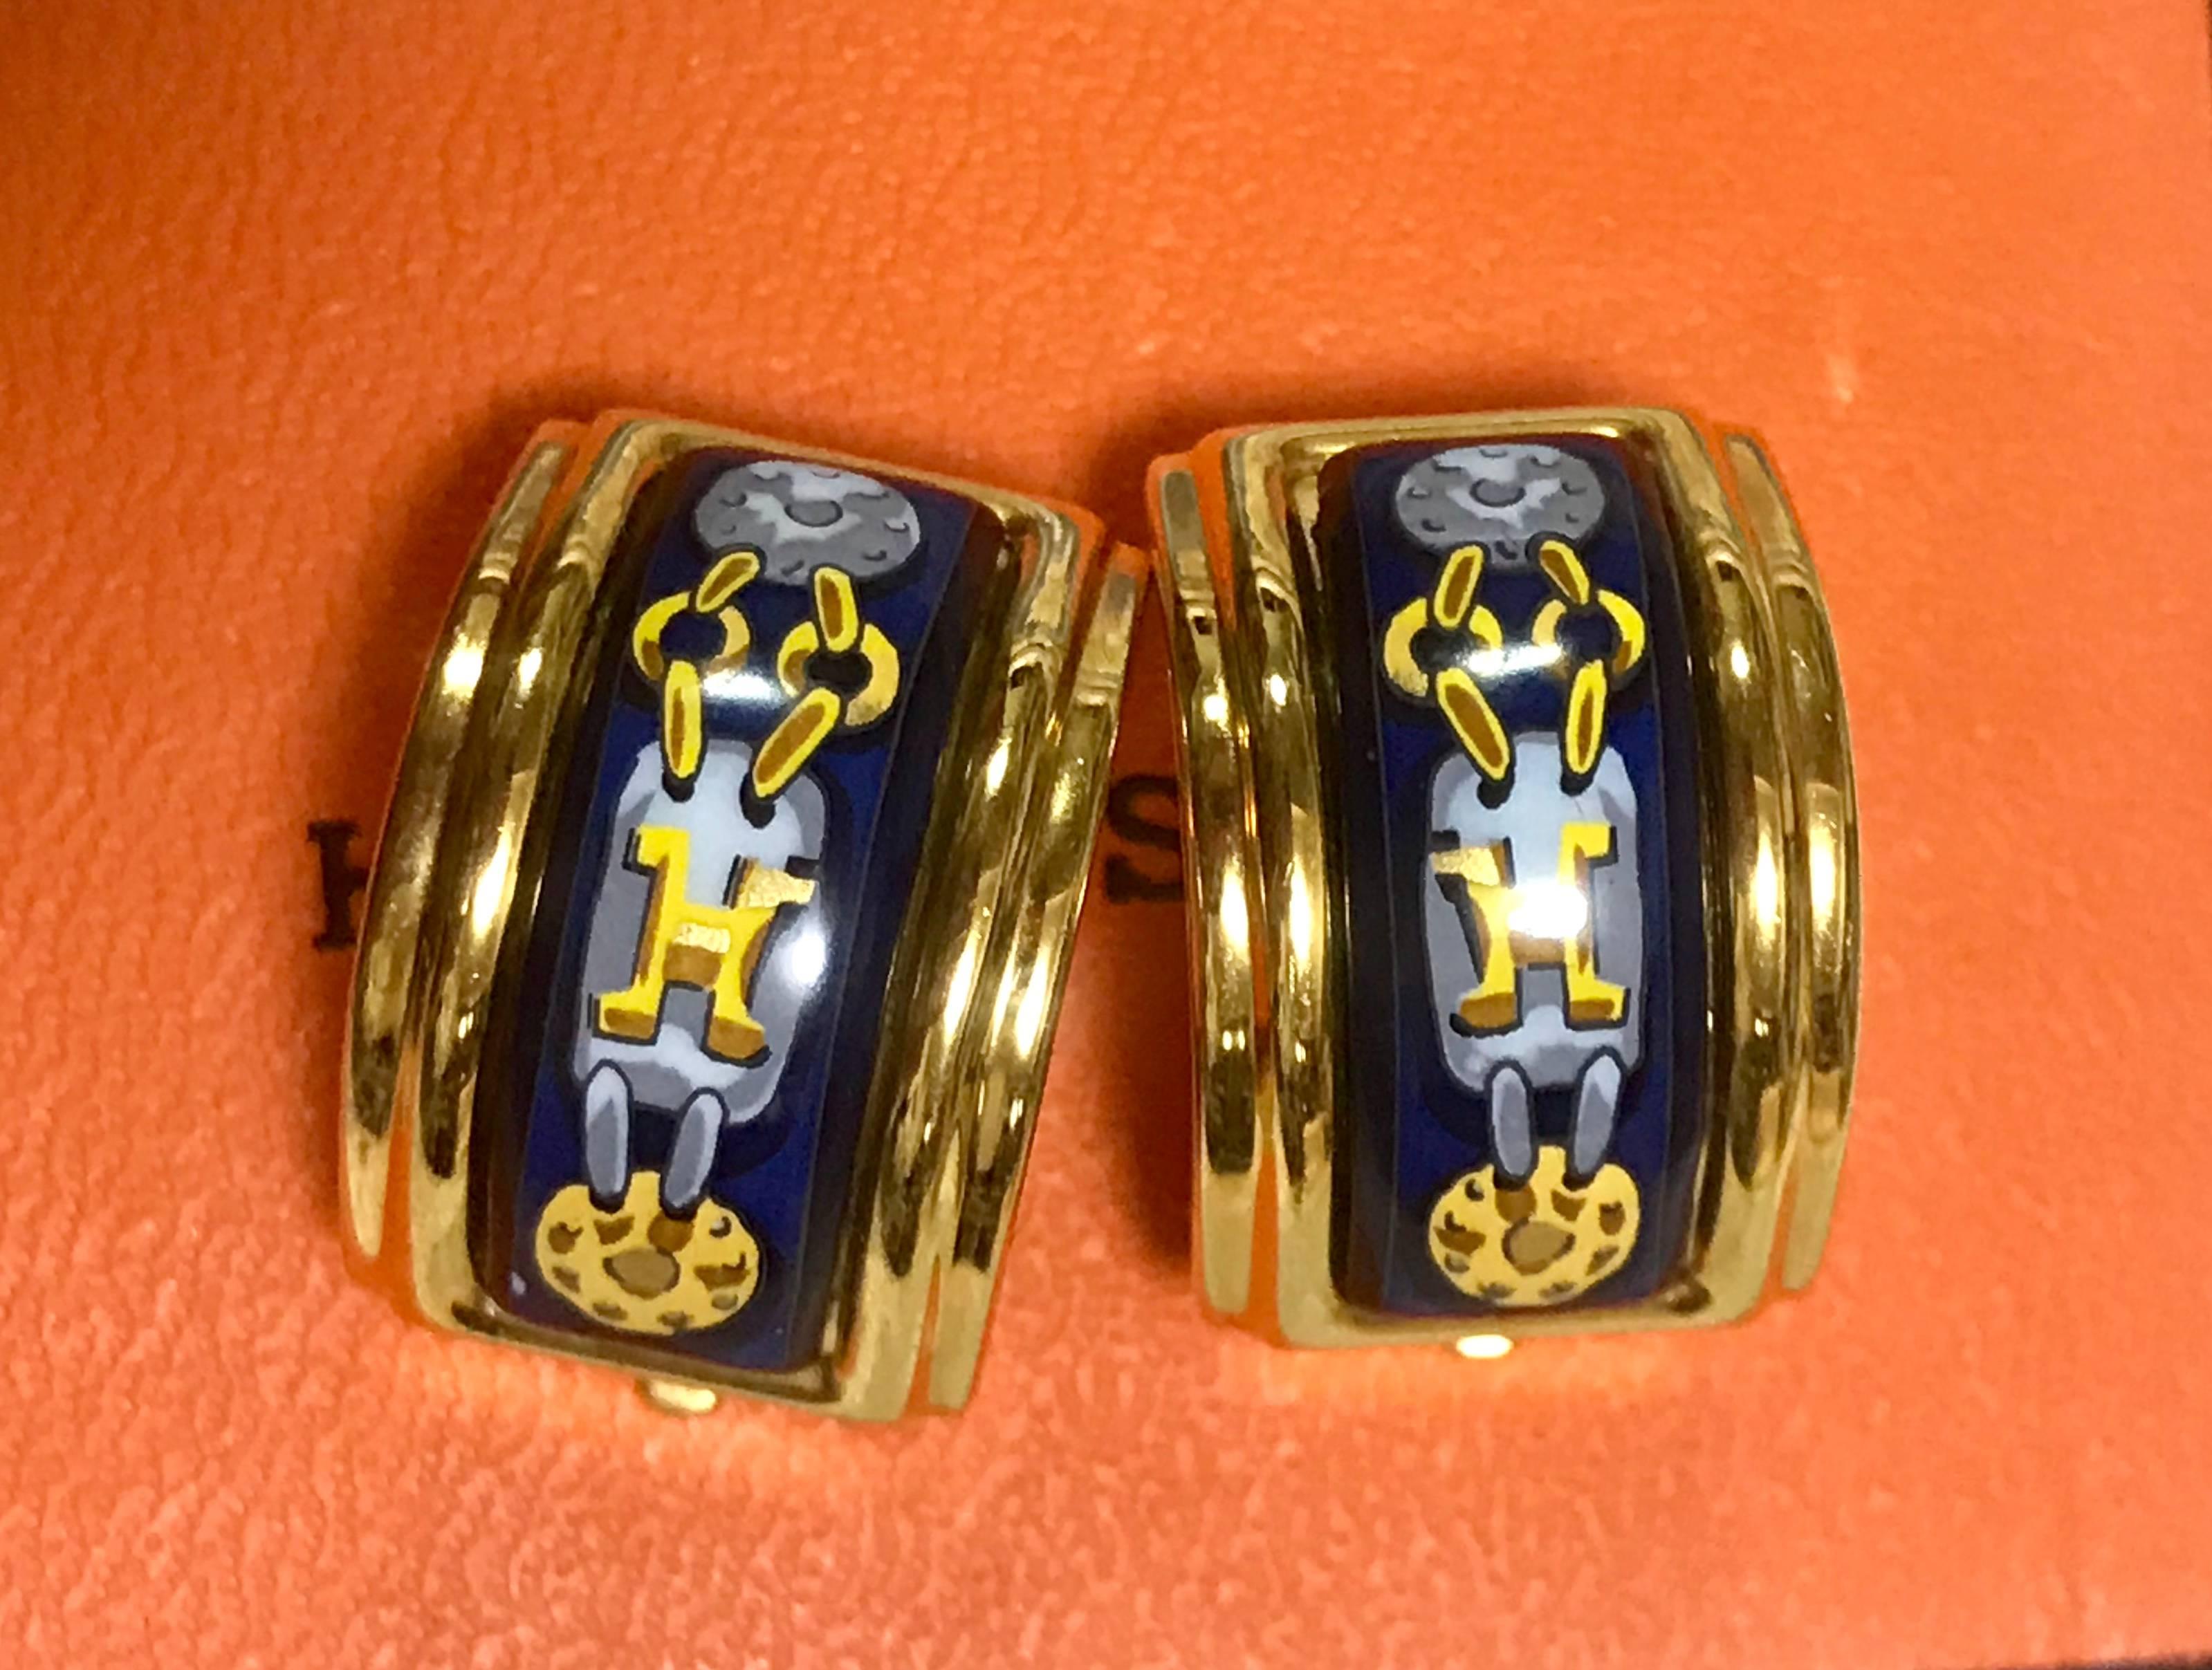 1990s. Vintage Hermes cloisonne golden earrings with blue and yellow chain, medal charm, H logo jewelry print design. Great gift idea.

Fabulous earrings in HERMES's iconic cloisonne. Beautiful vintage condition!

Excellent beauty and elegance with